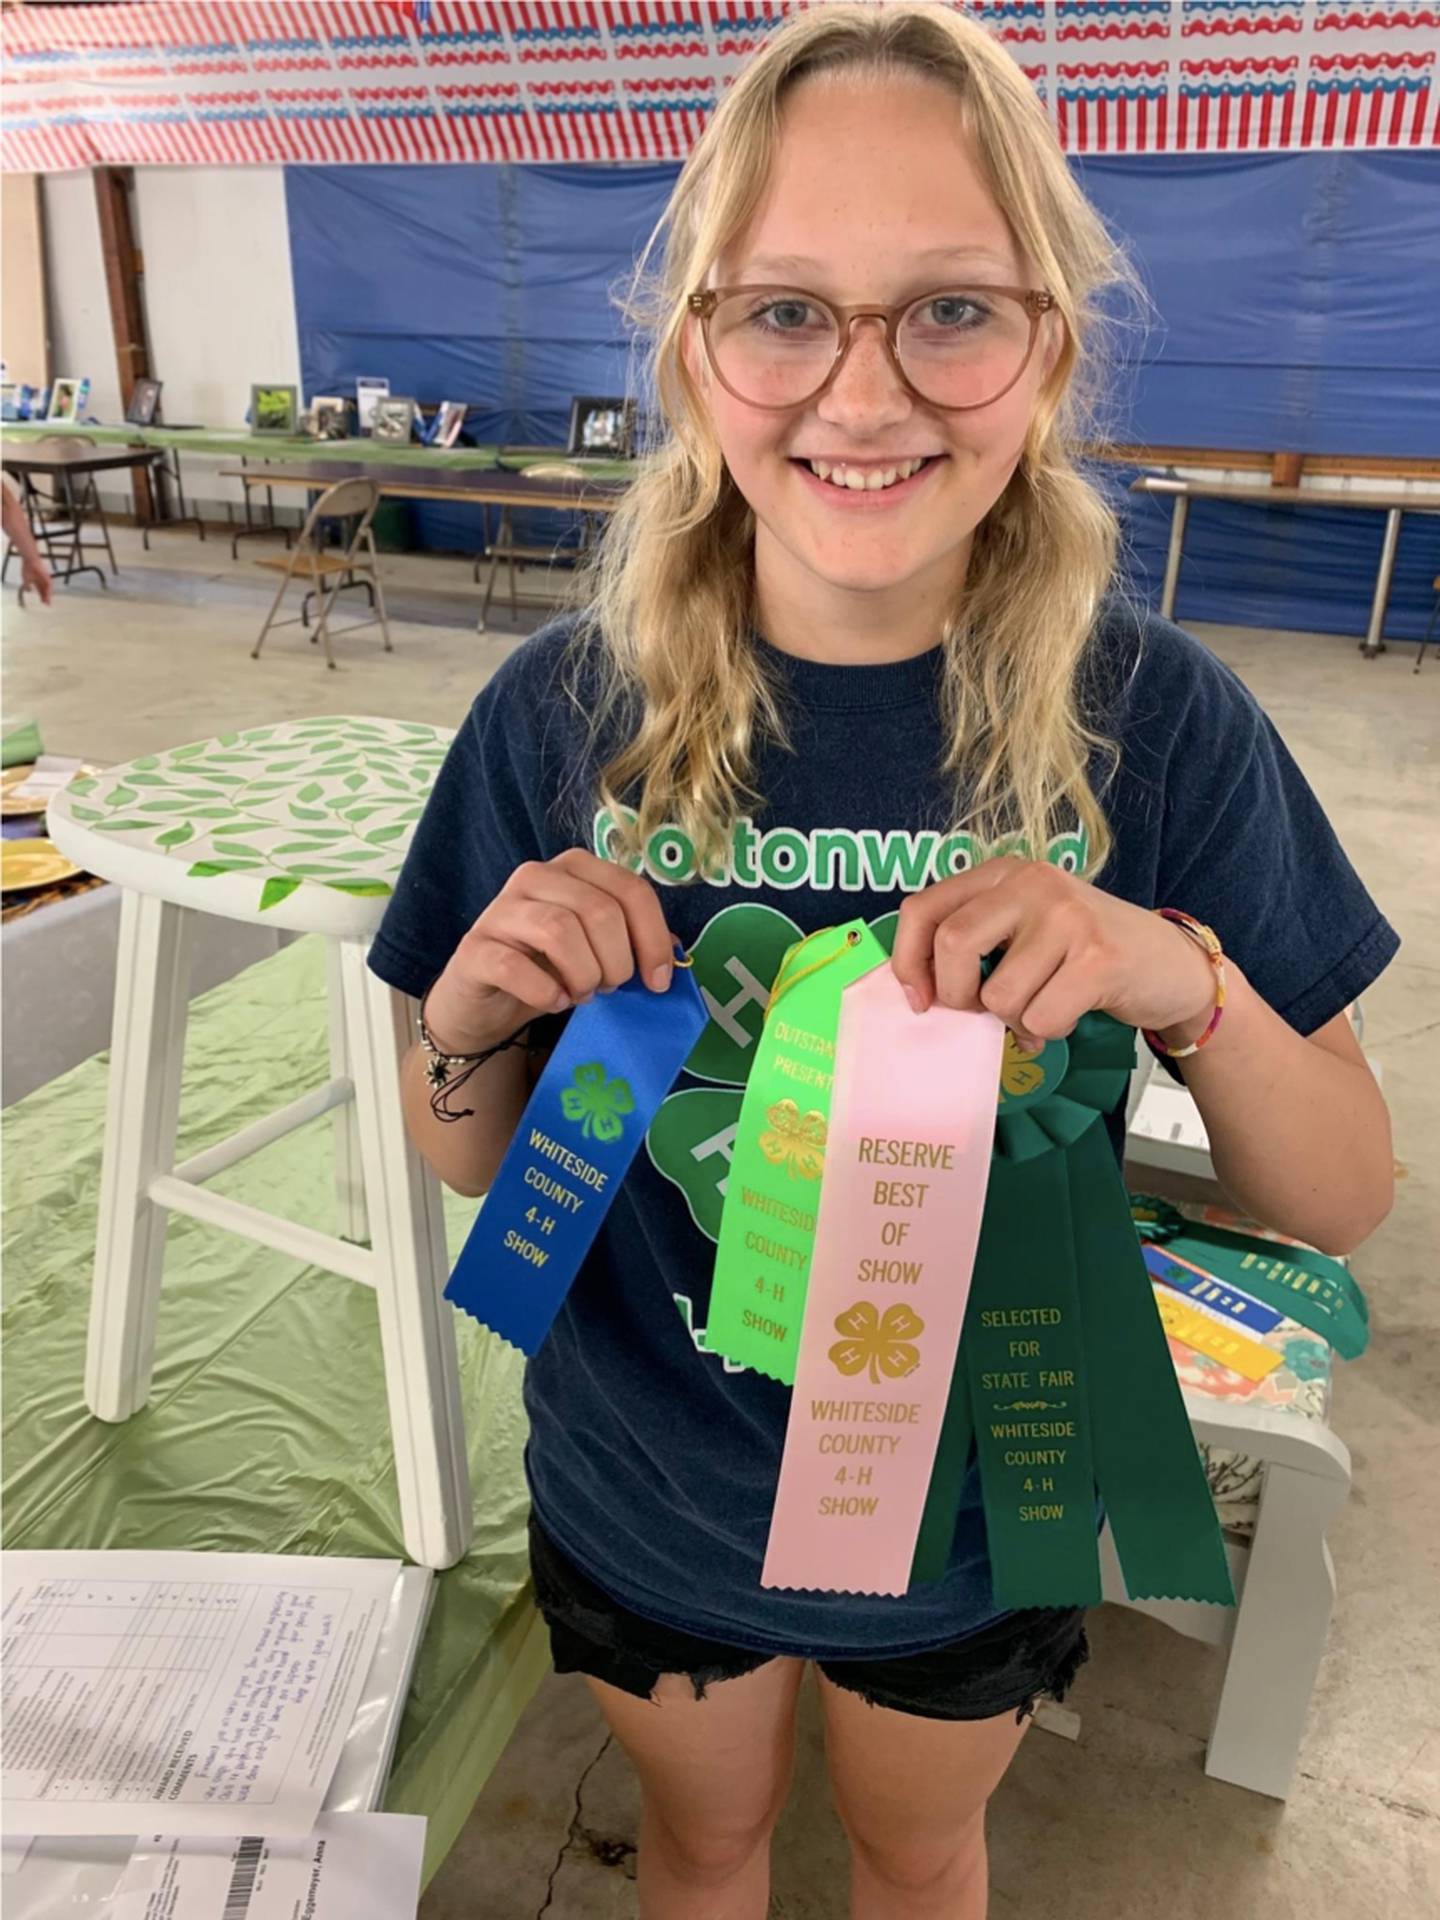 Anna Eggemeyer of the Cottonwood Club in Morrison poses with her 4-H ribbons for her Interior Design project at the Whiteside County 4-H Fair.